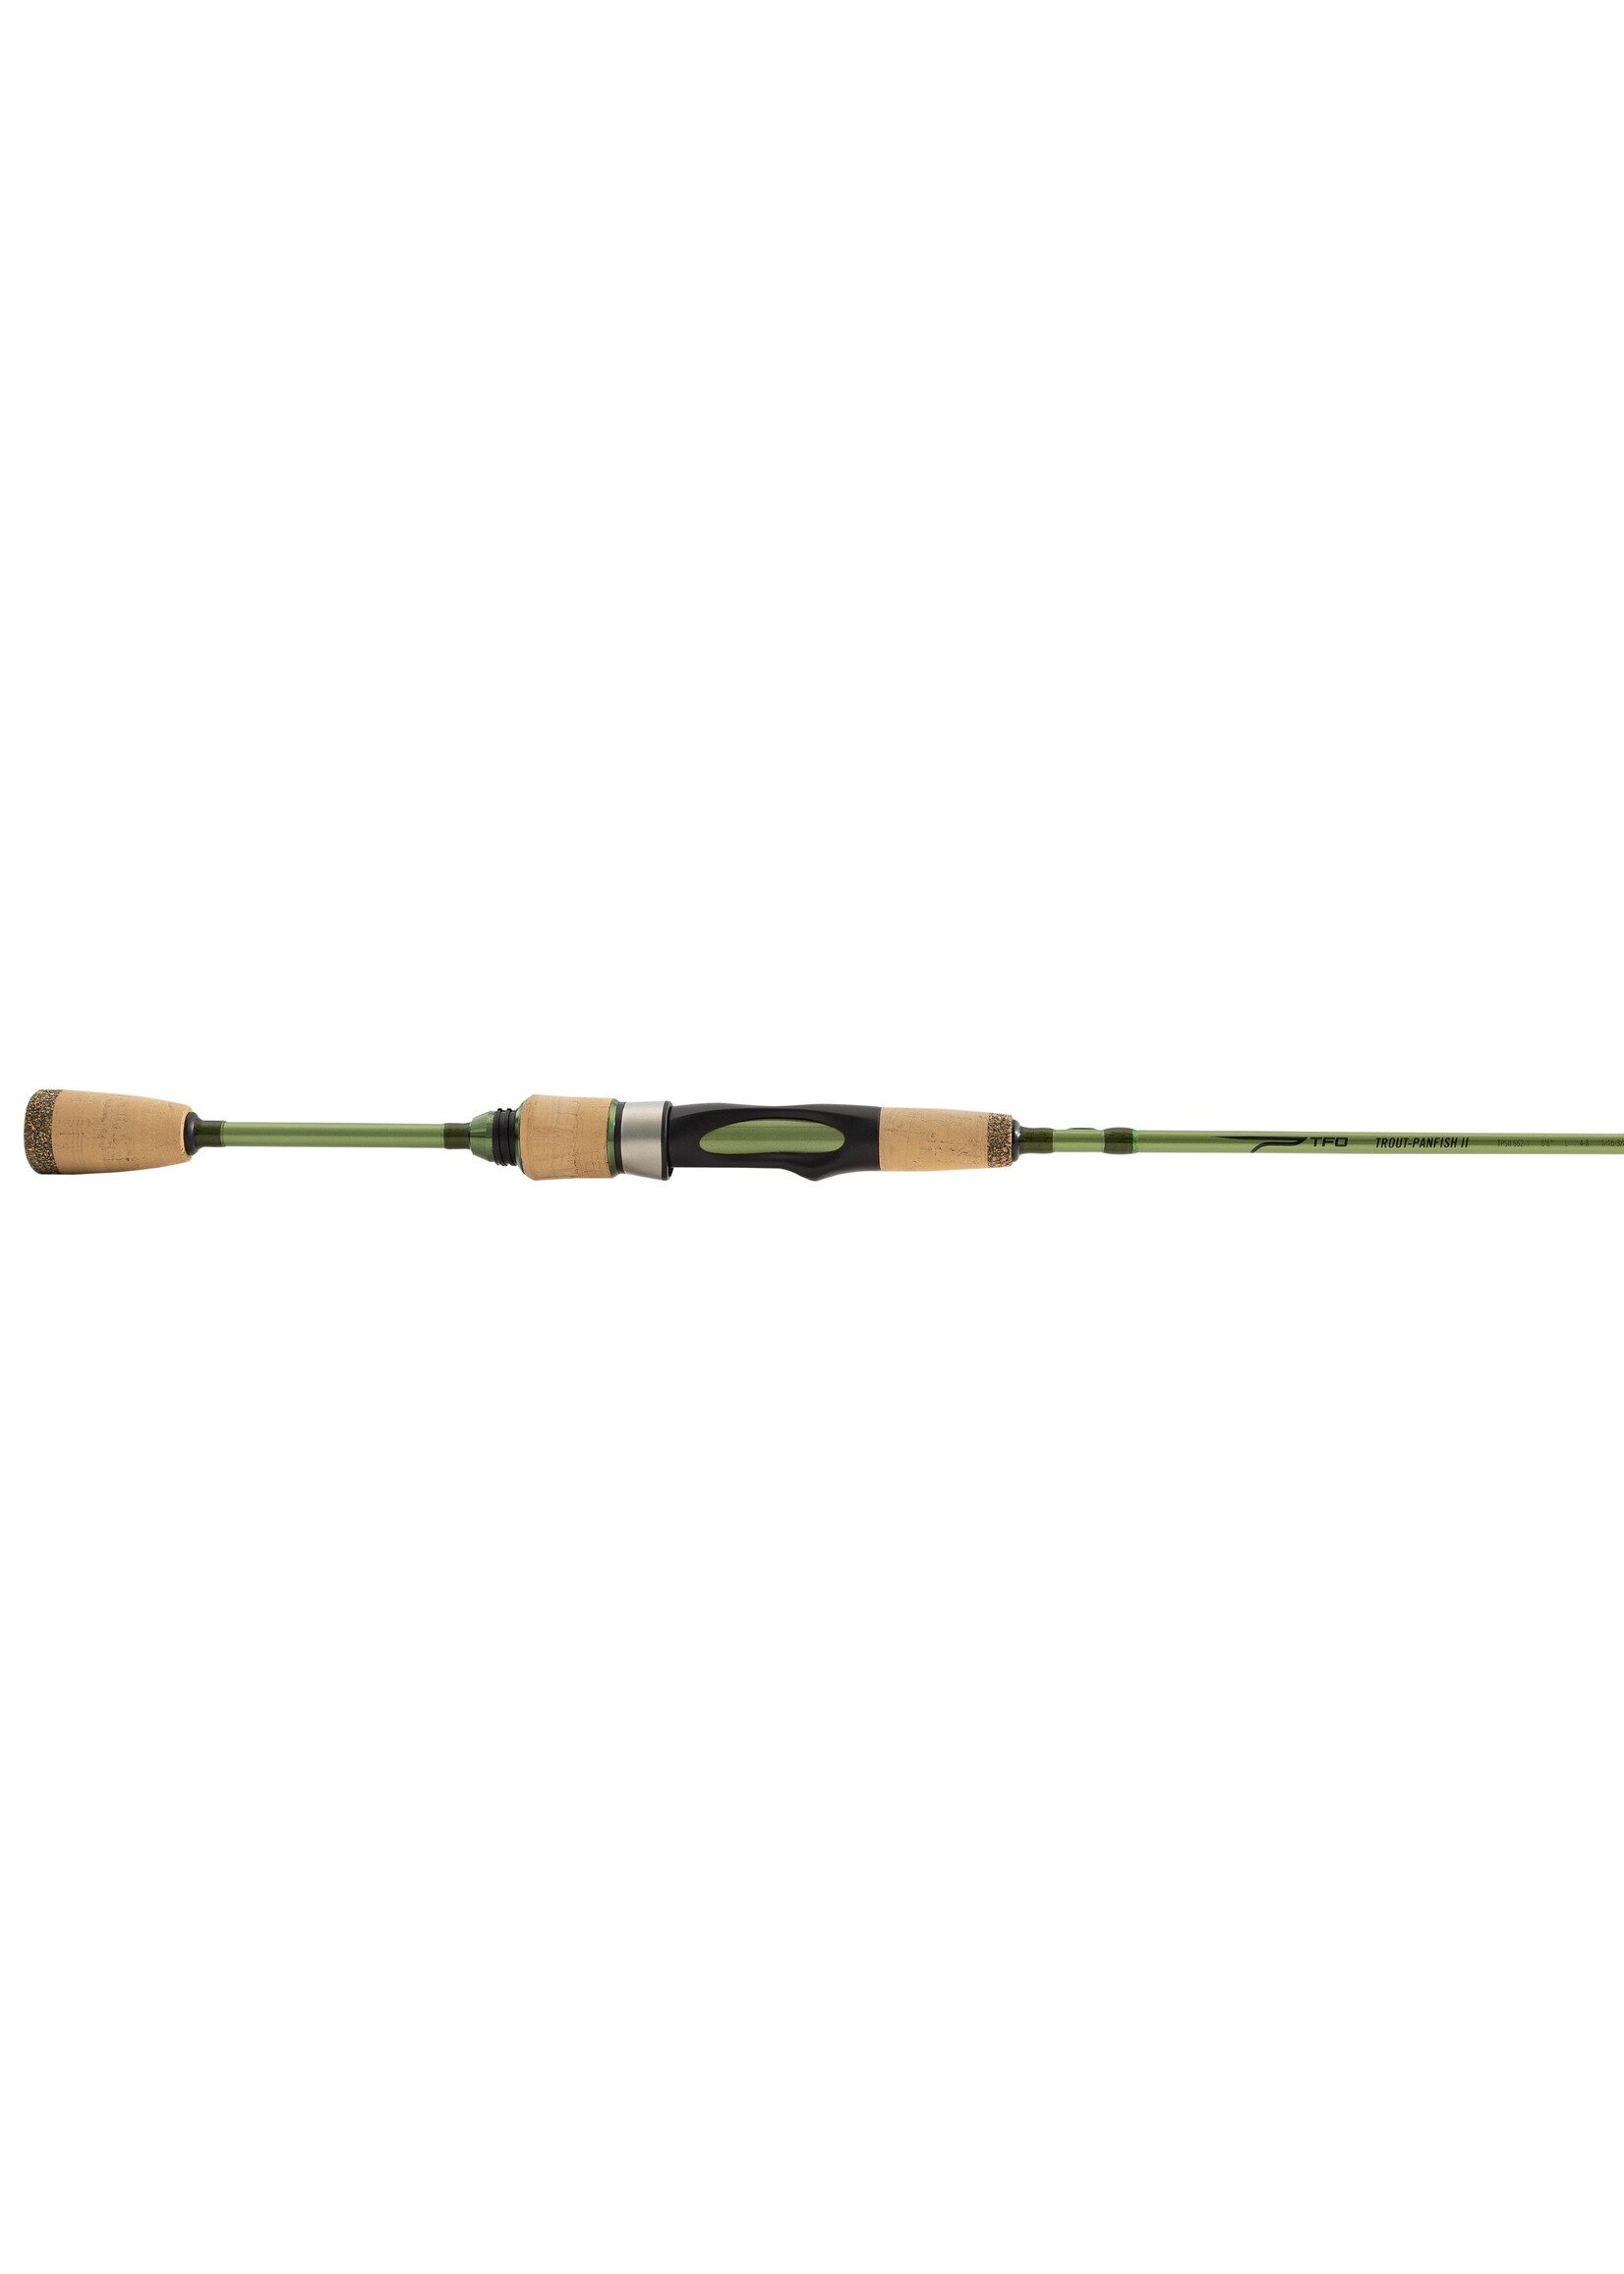 Temple Fork Outfitters TFO Trout-Panfish II Spinning Rods